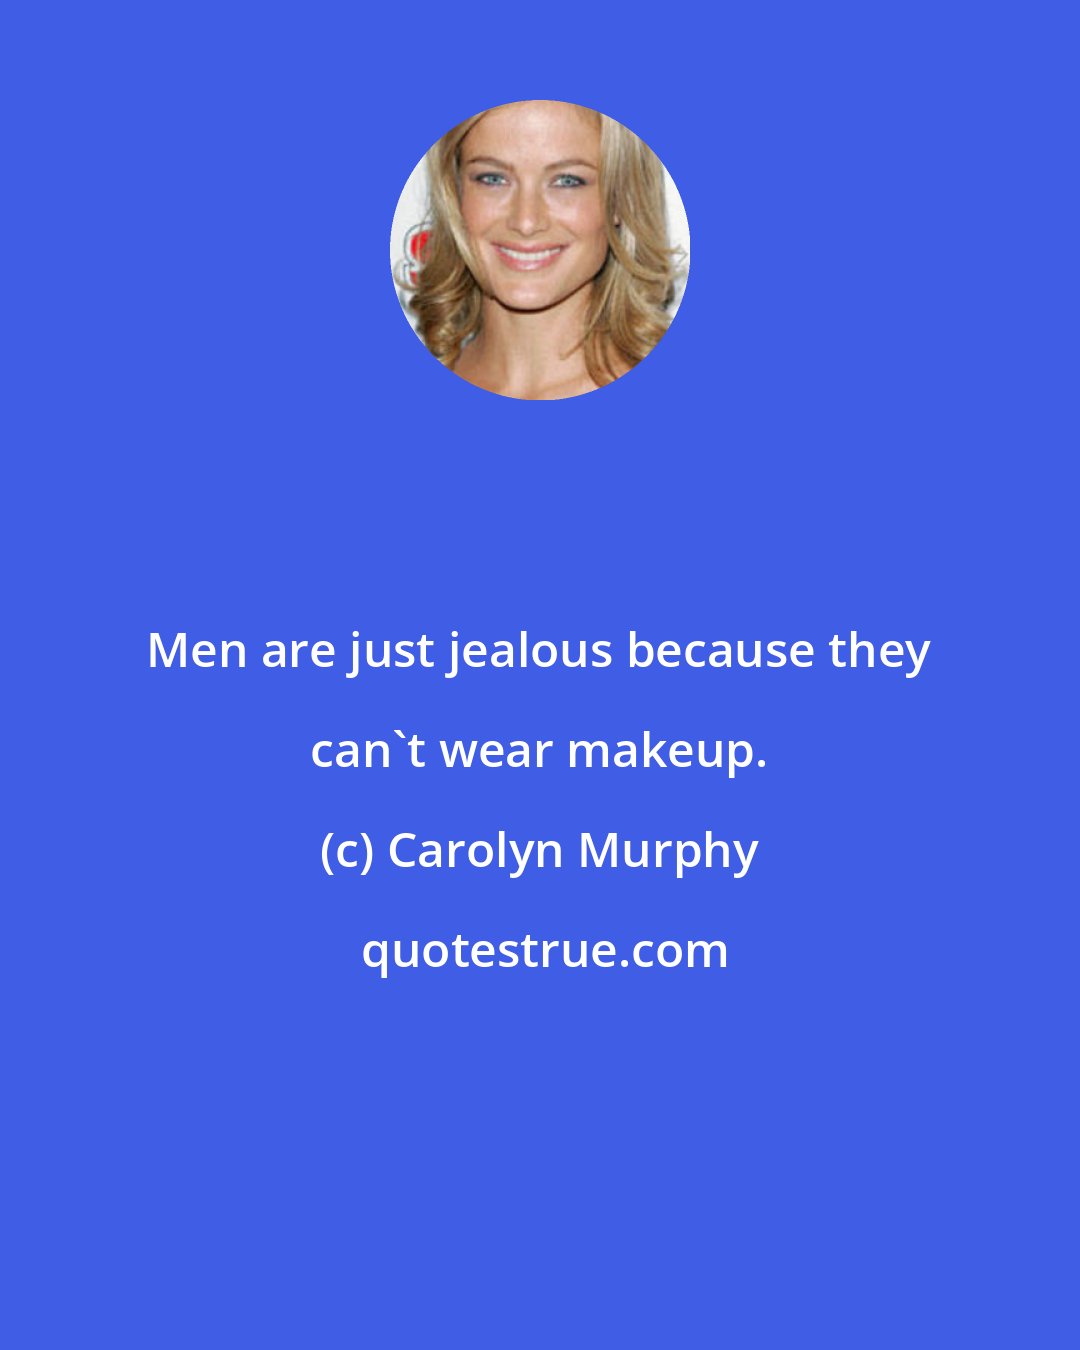 Carolyn Murphy: Men are just jealous because they can't wear makeup.